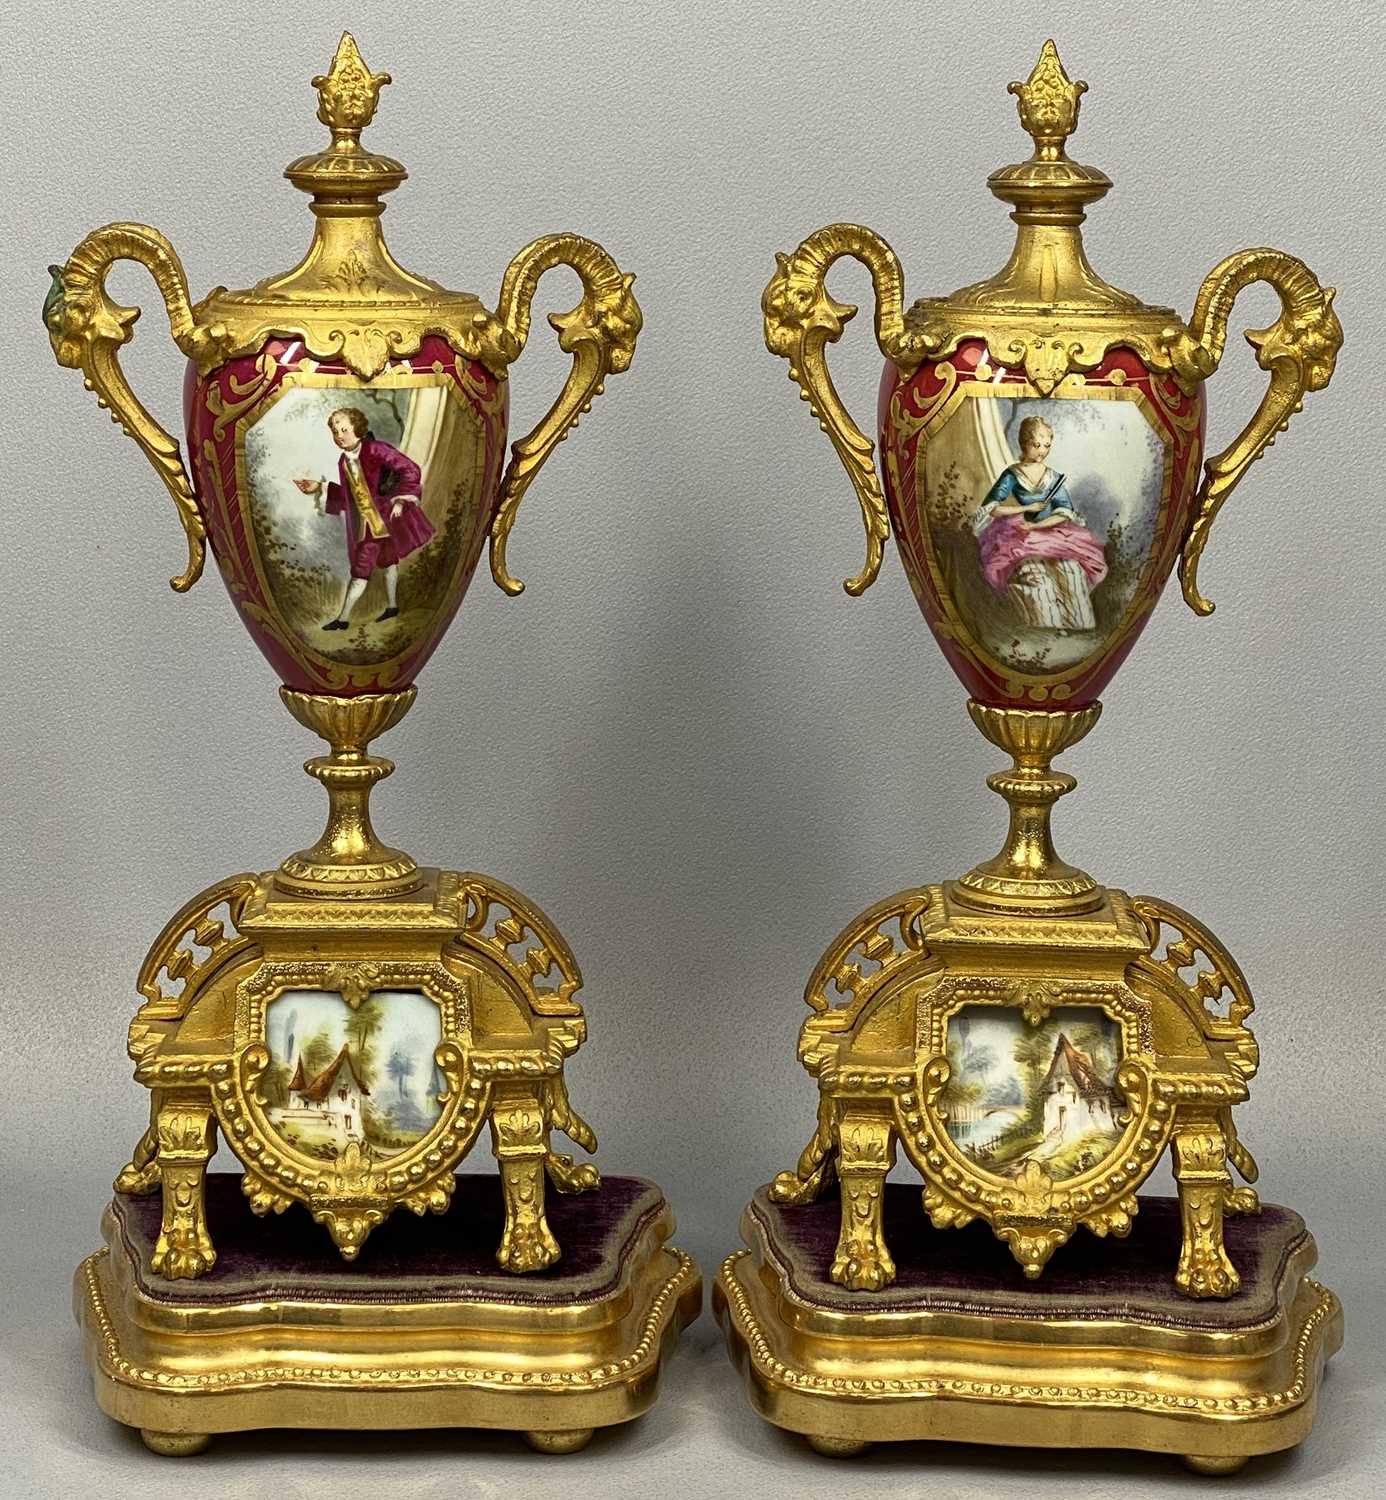 FRENCH GILT METAL SEVRES STYLE PORCELAIN CLOCK GARNITURE, late 19th century, the hand painted panels - Image 4 of 5